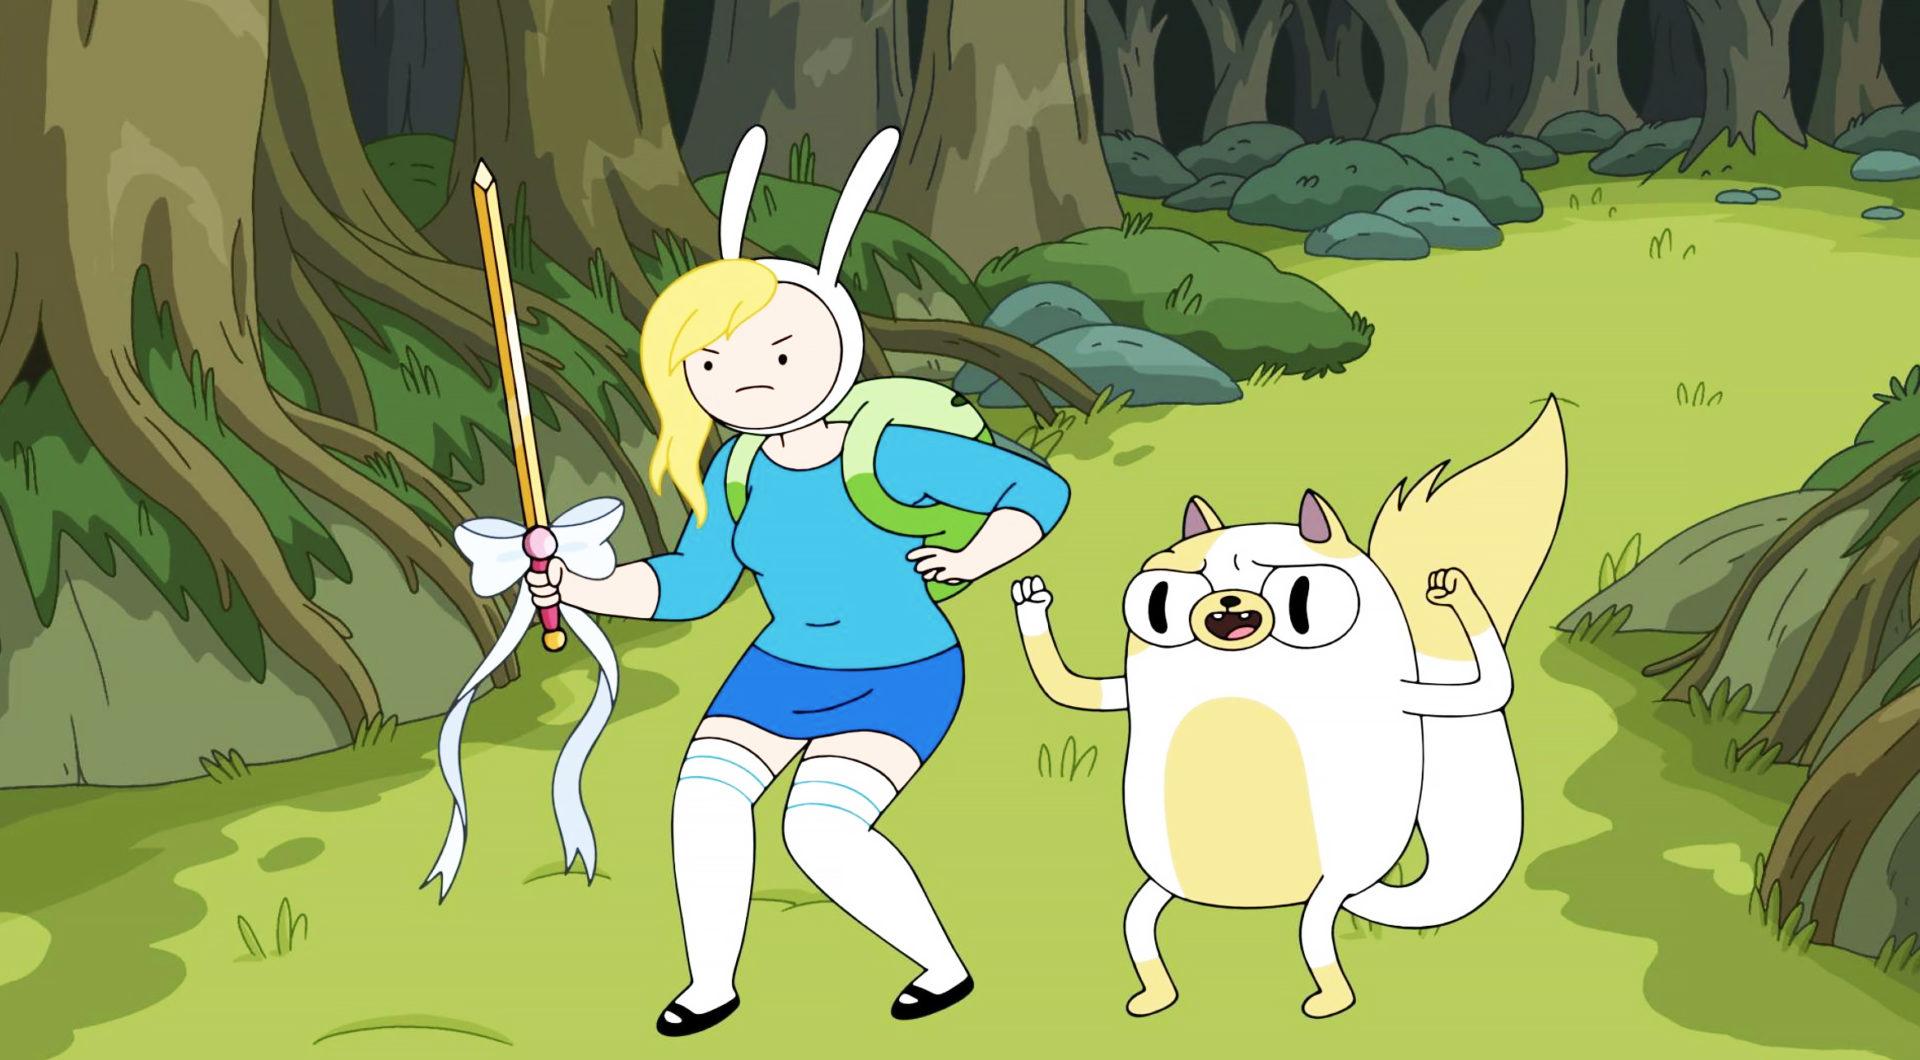 fionna and cake in adventure time